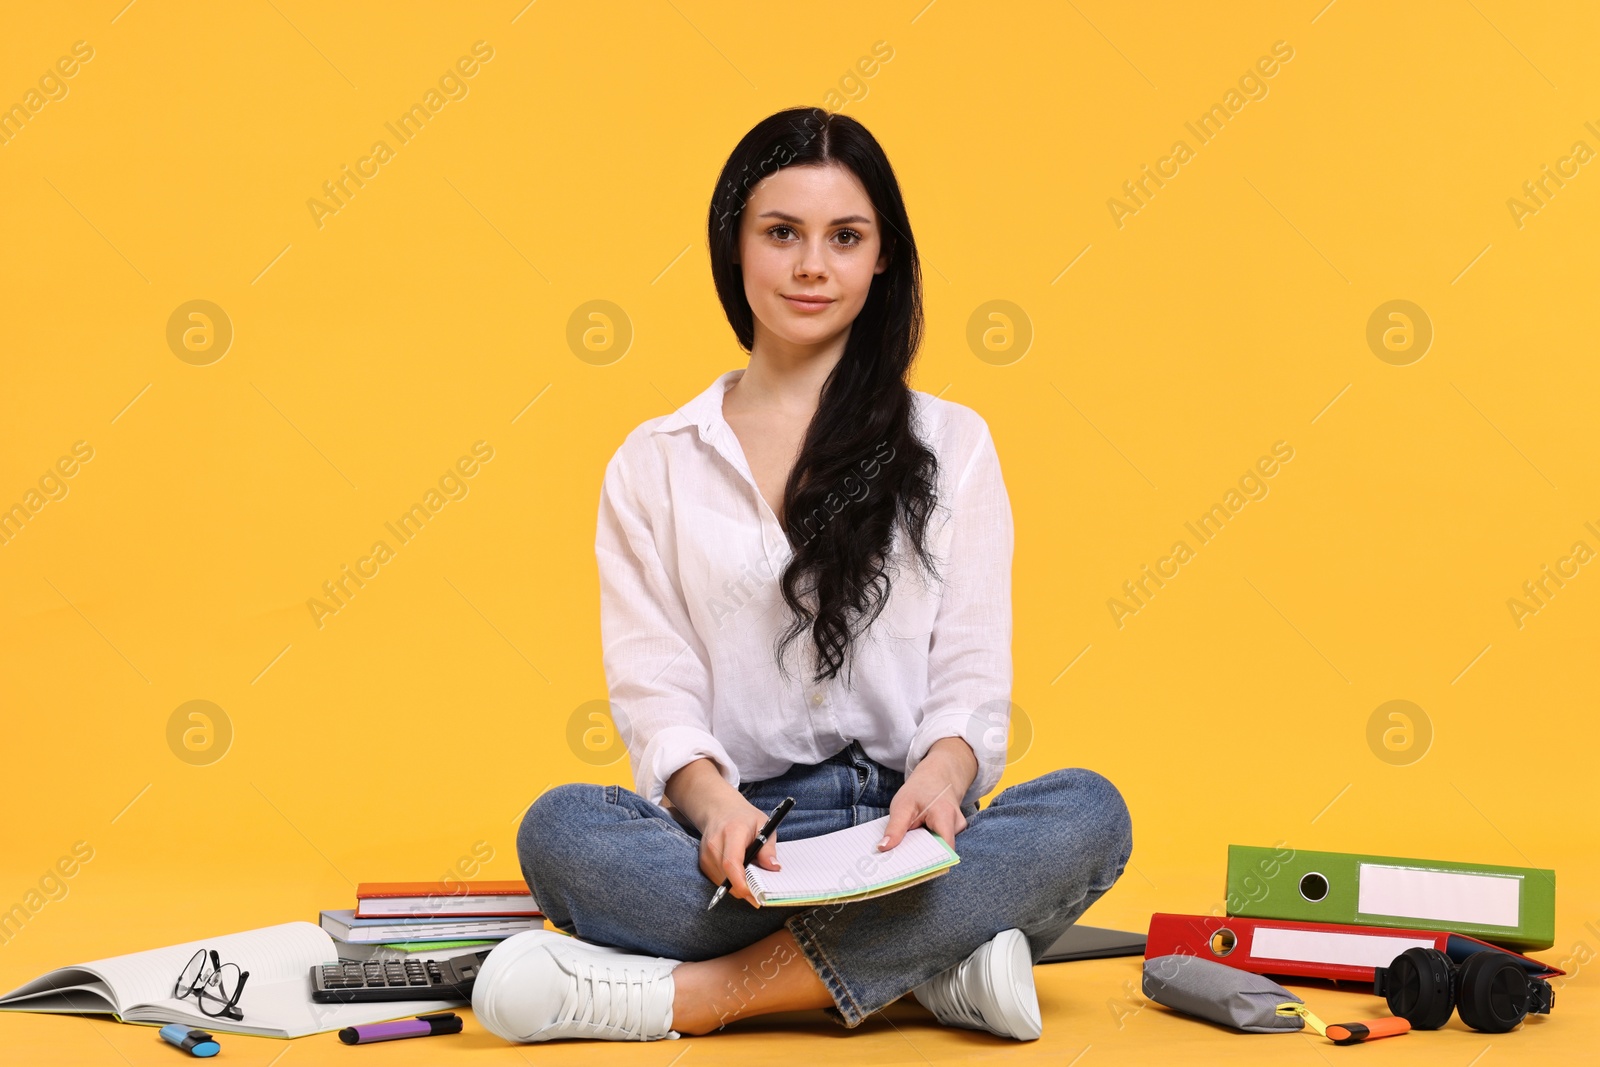 Photo of Student with notebook sitting among books and stationery on yellow background